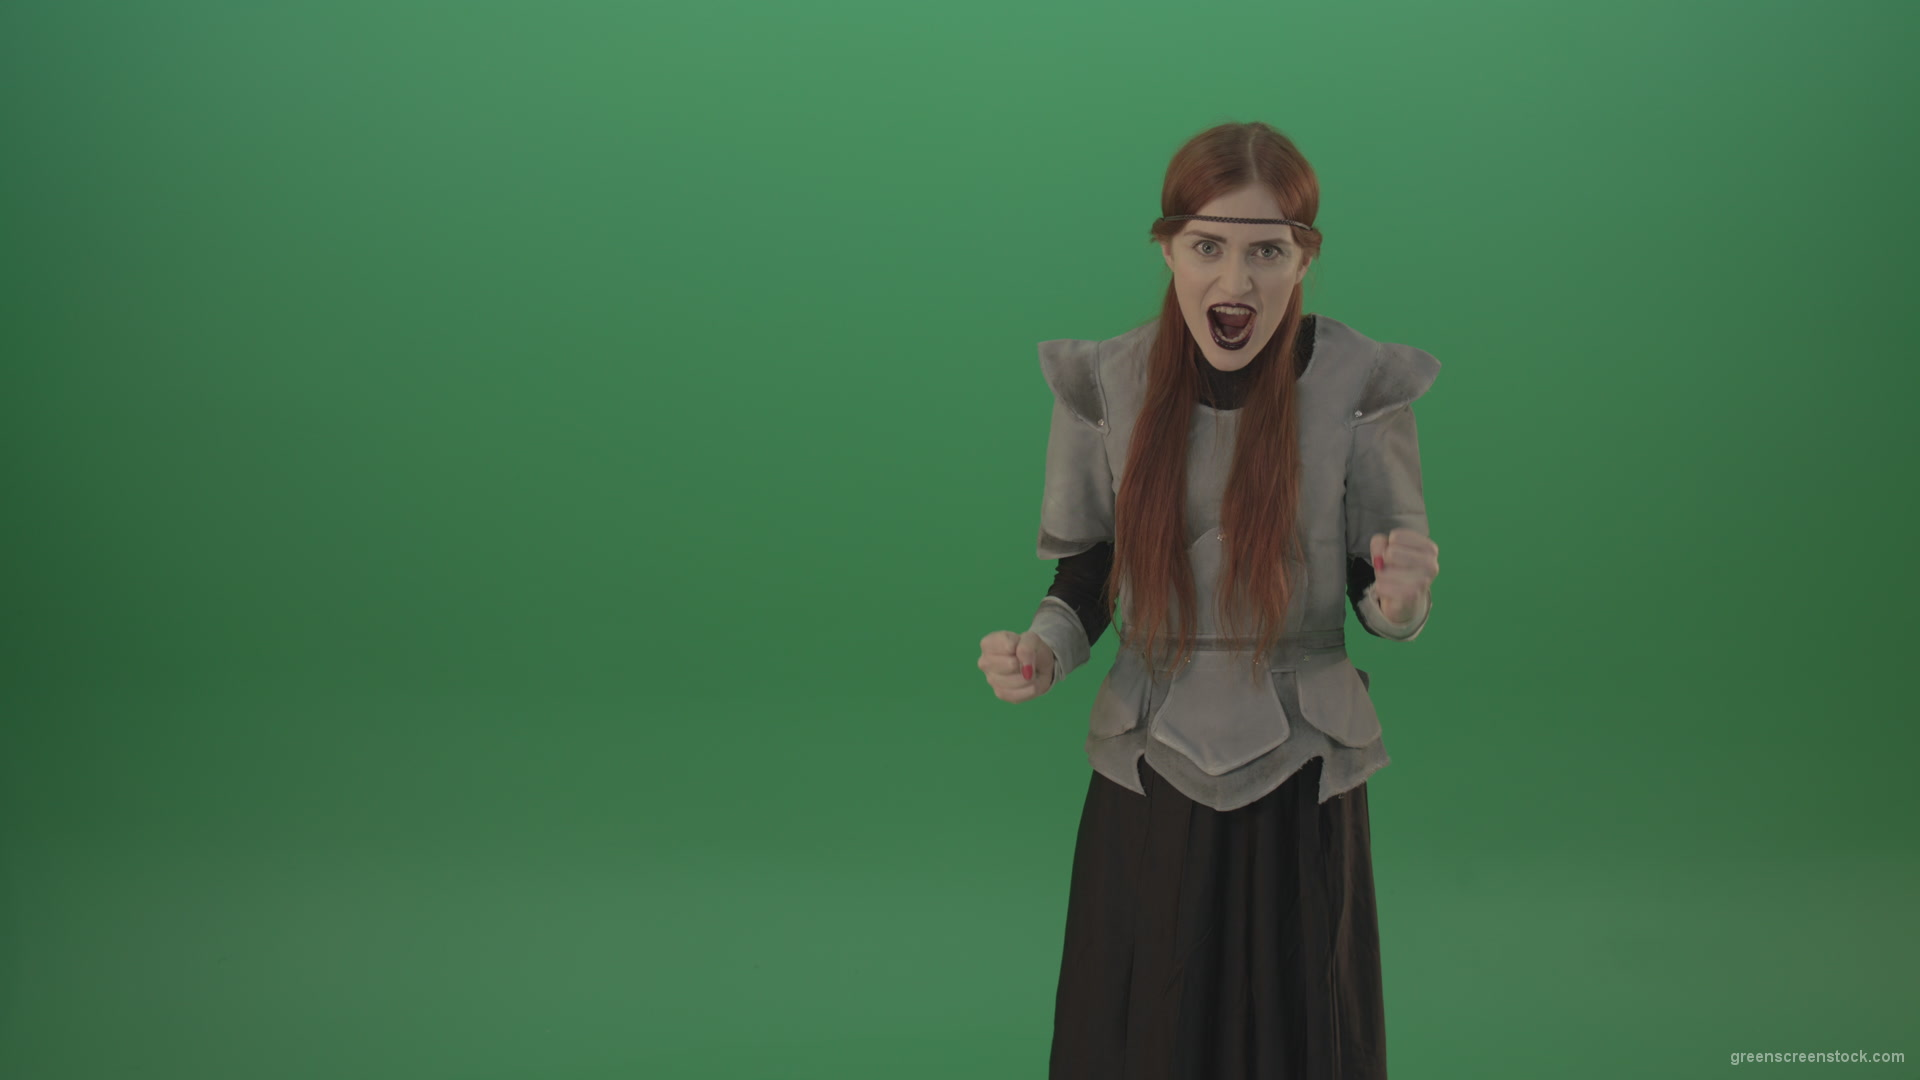 Witch-girl-watched-and-screamed-at-the-camera-with-green-eyes-on-a-green-background_006 Green Screen Stock